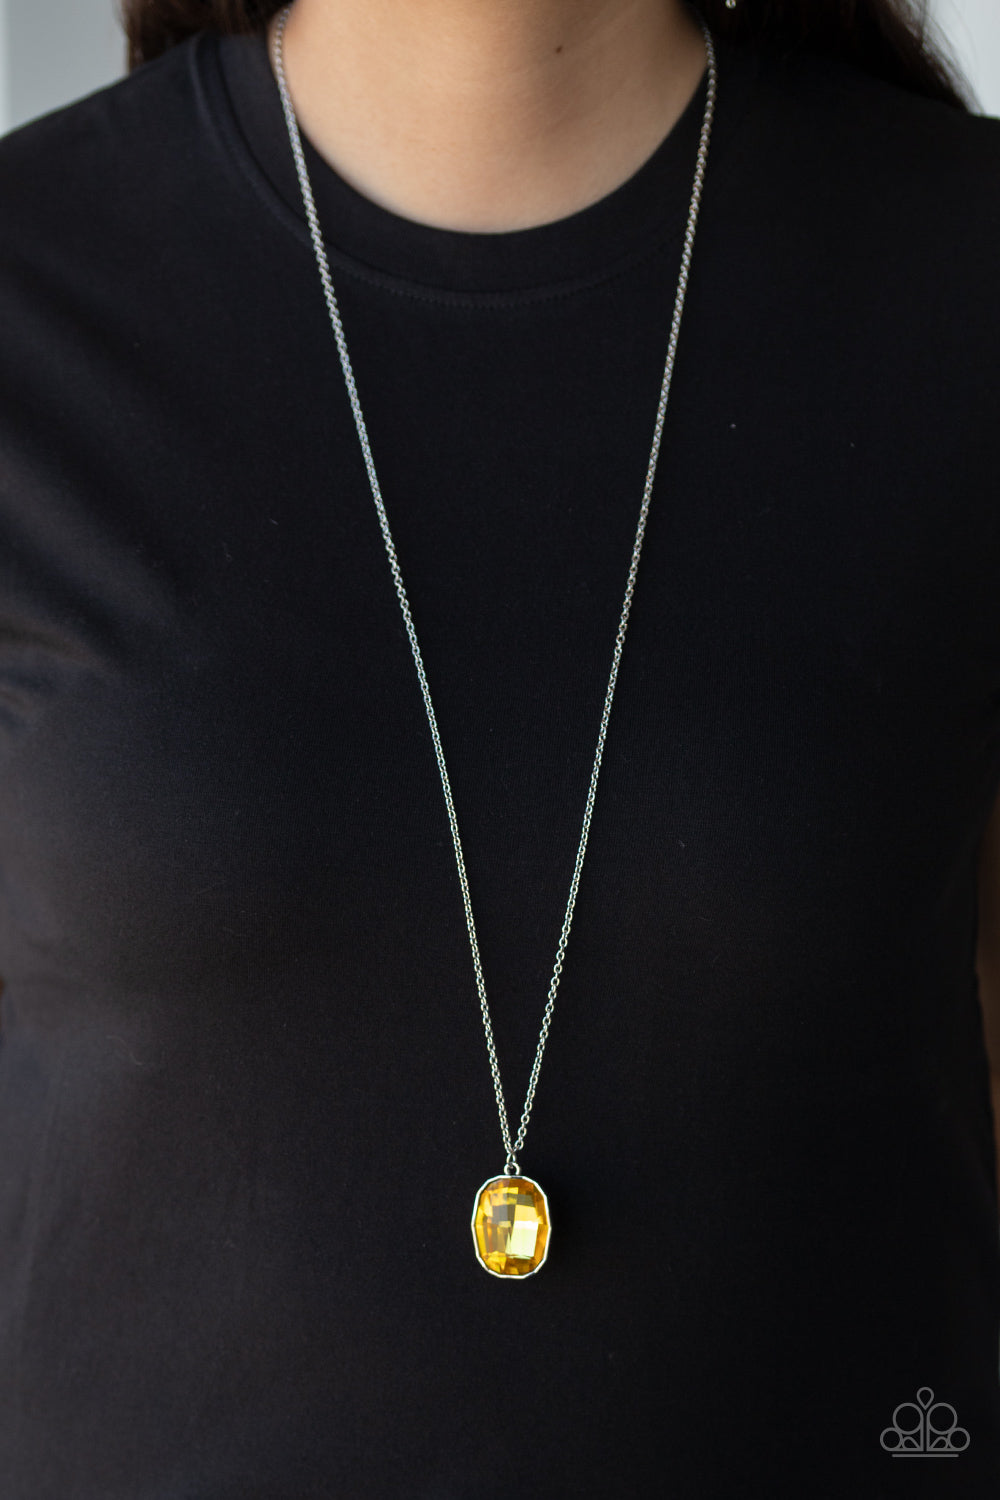 Imperfect Iridescence - Yellow Necklace